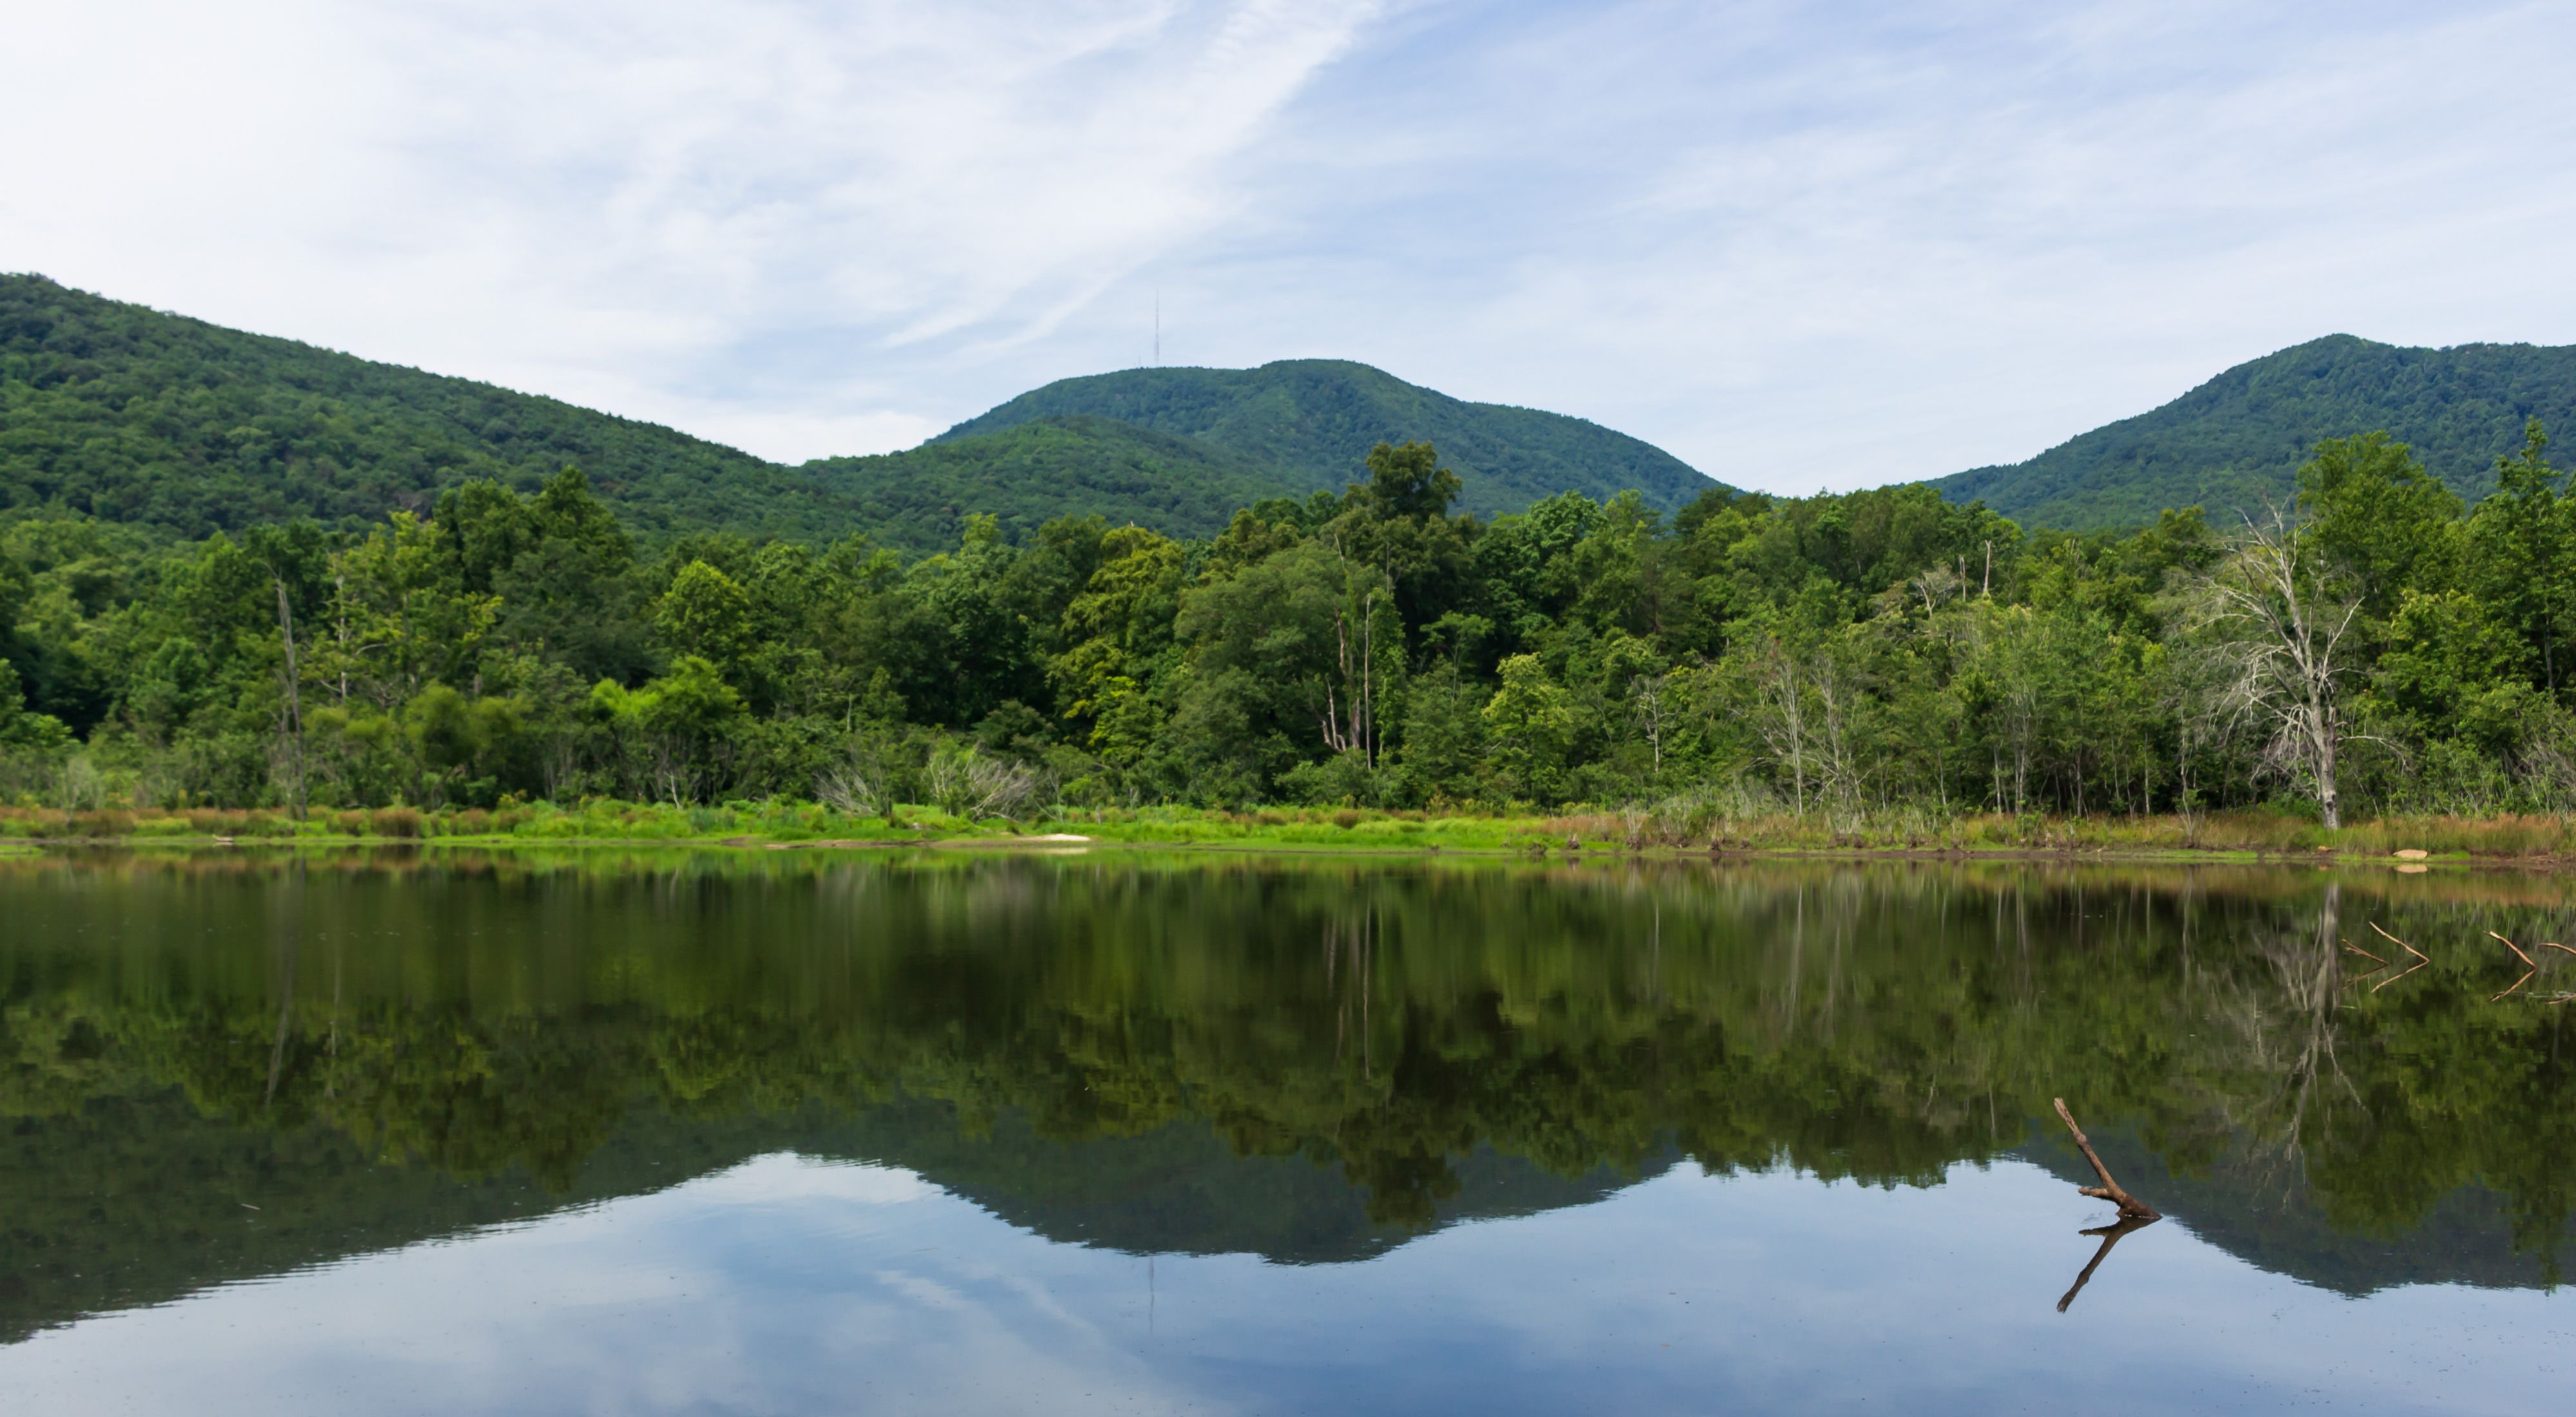 View of a wide body of water with trees lining its shore and mountains in the background.